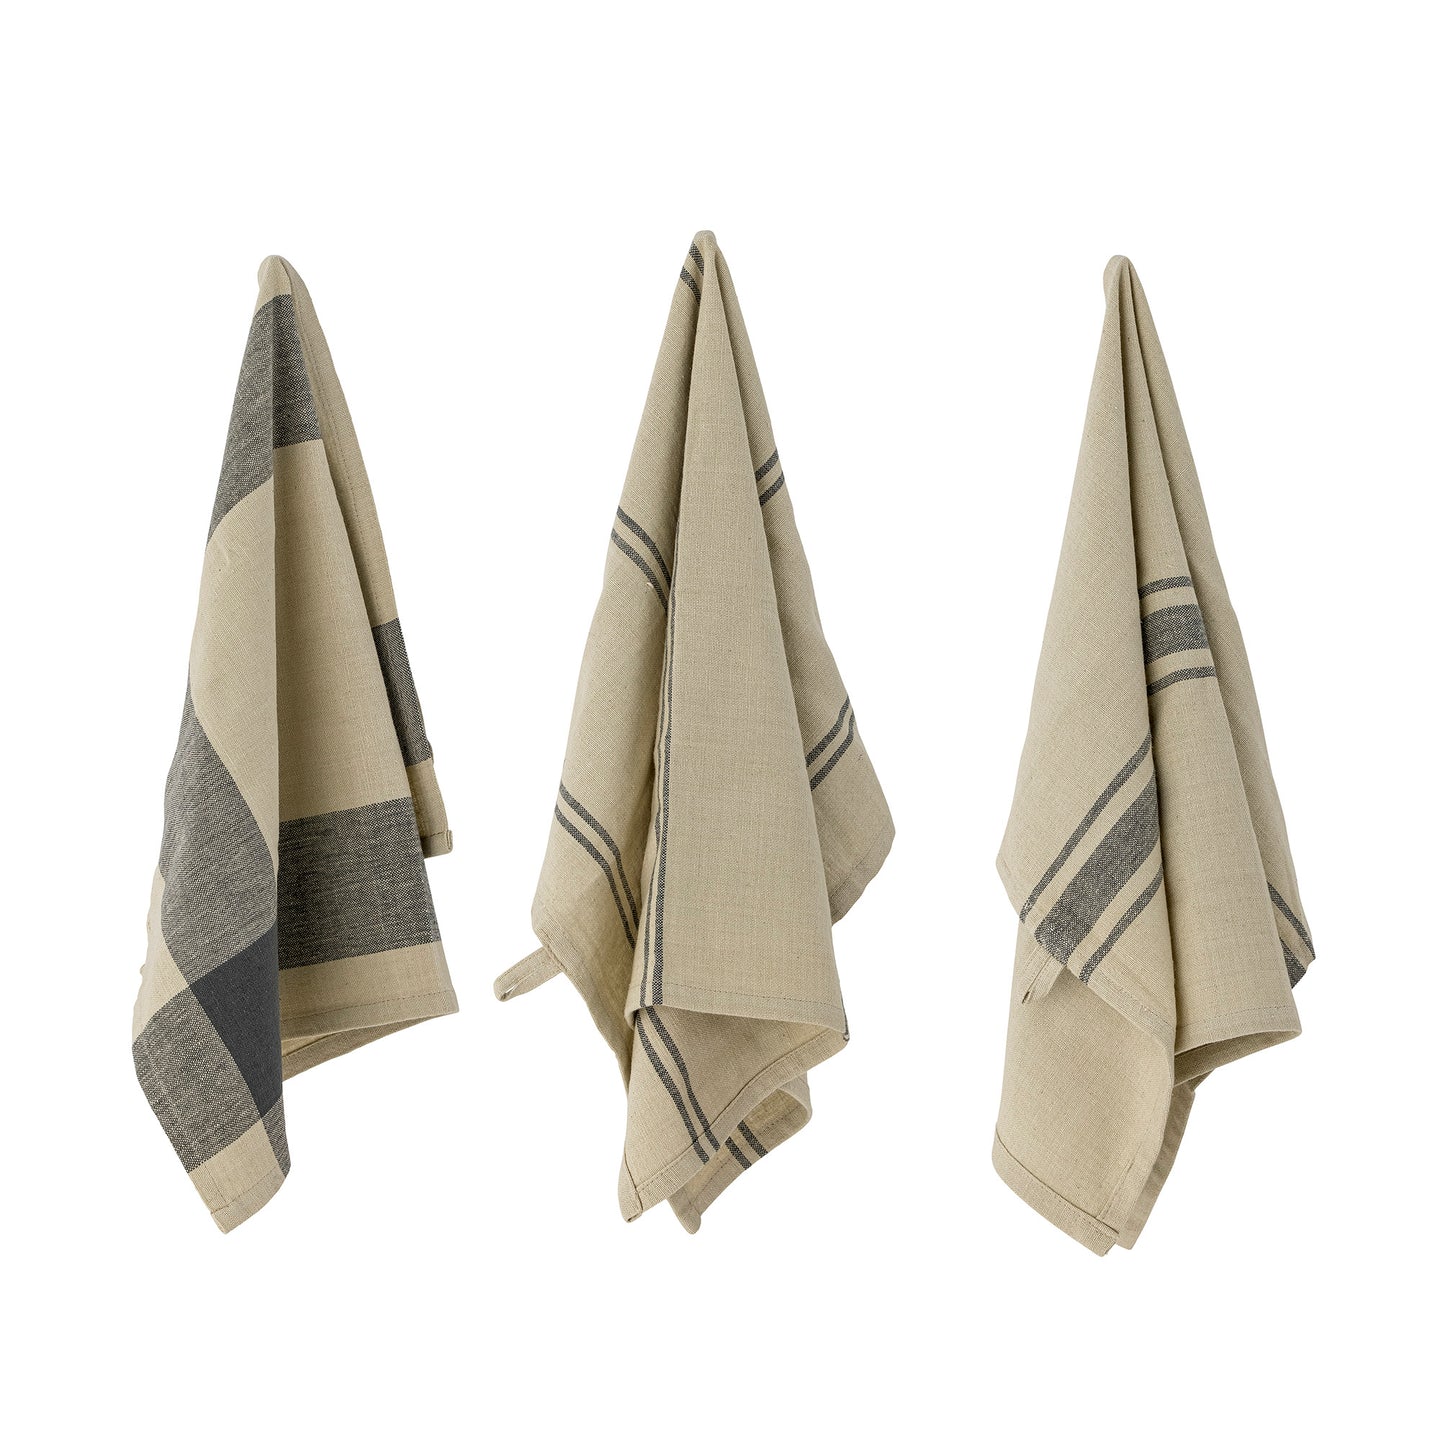 The Anilla Kitchen Towels by Creative Collection